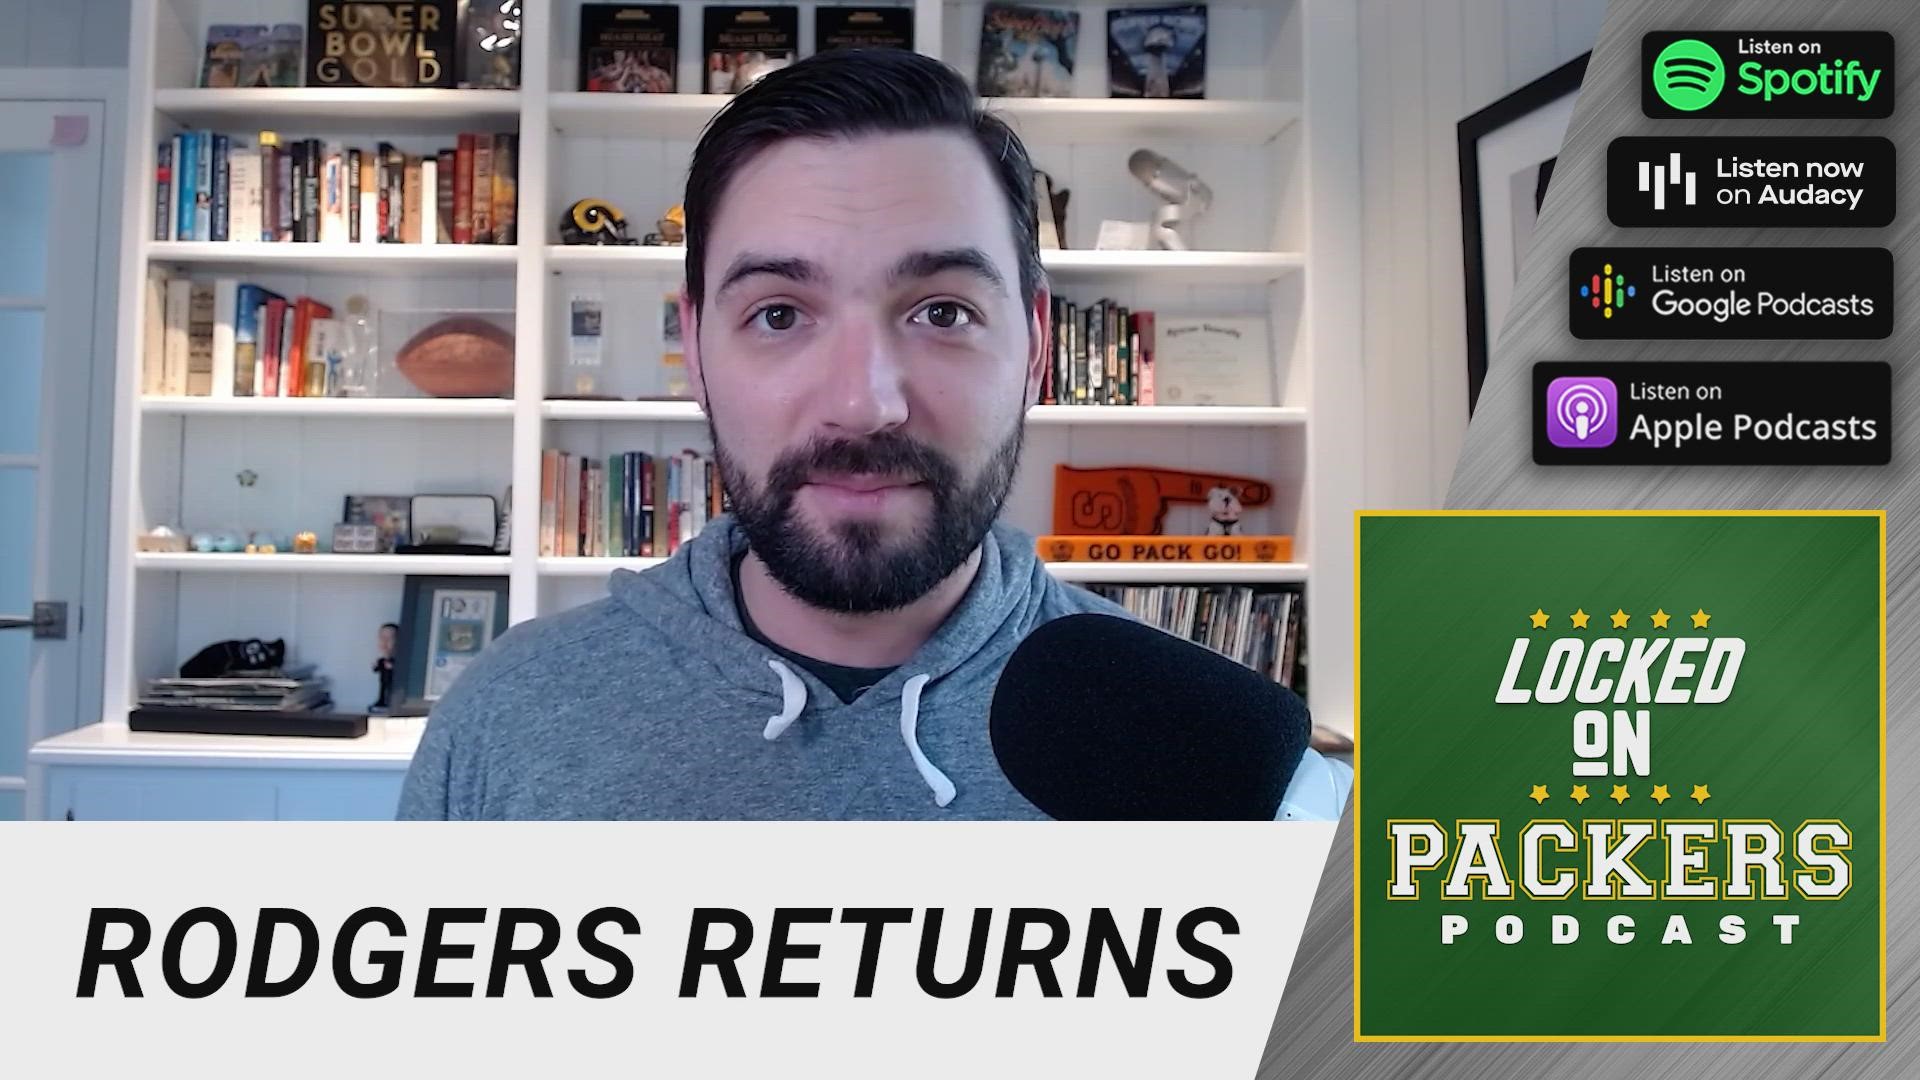 Locked On Packers host Peter Bukowski reacts to the news that Aaron Rodgers and the Packers have agreed to a new four-year deal.